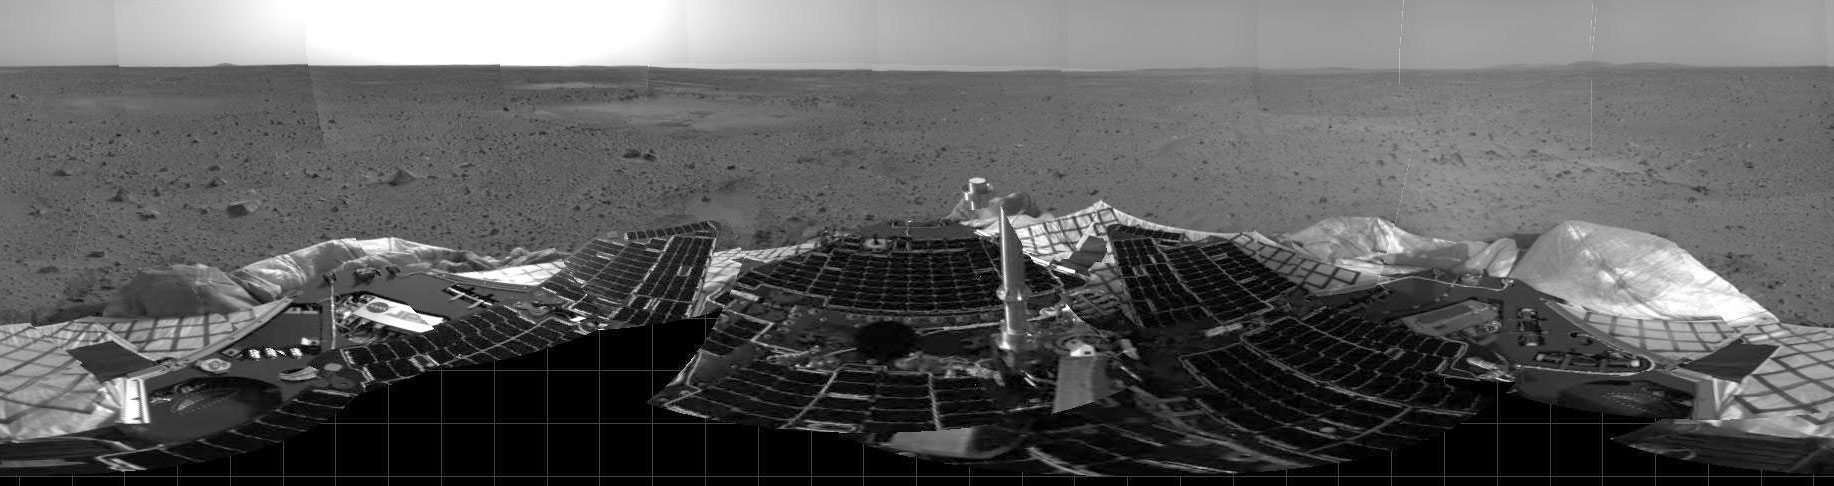 Panoramic view of the Spirit Rover's landing site on Mars